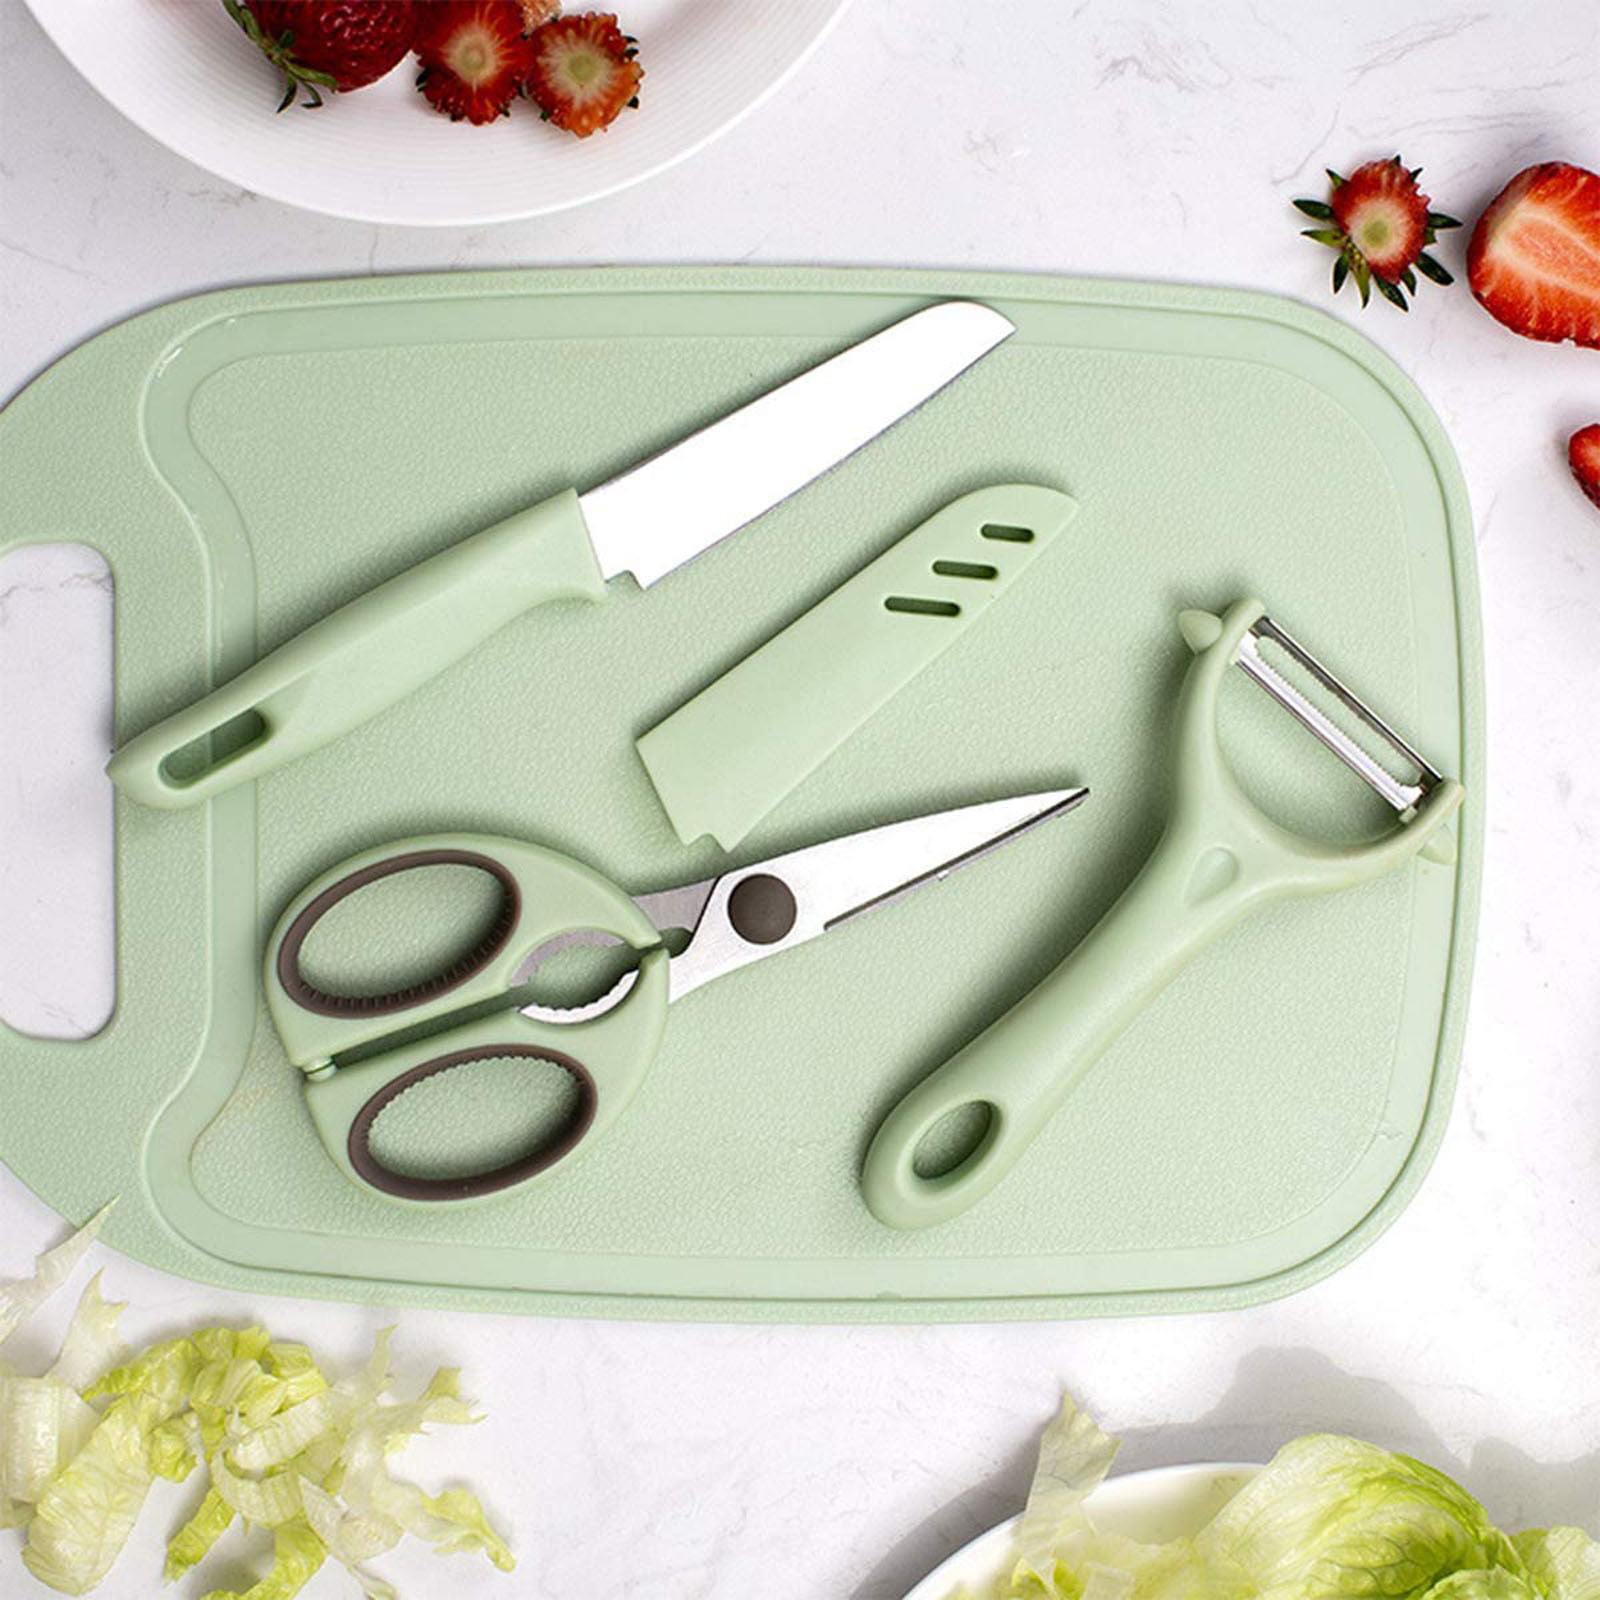 4-Piece Cutting Board Set with Knife & Shears